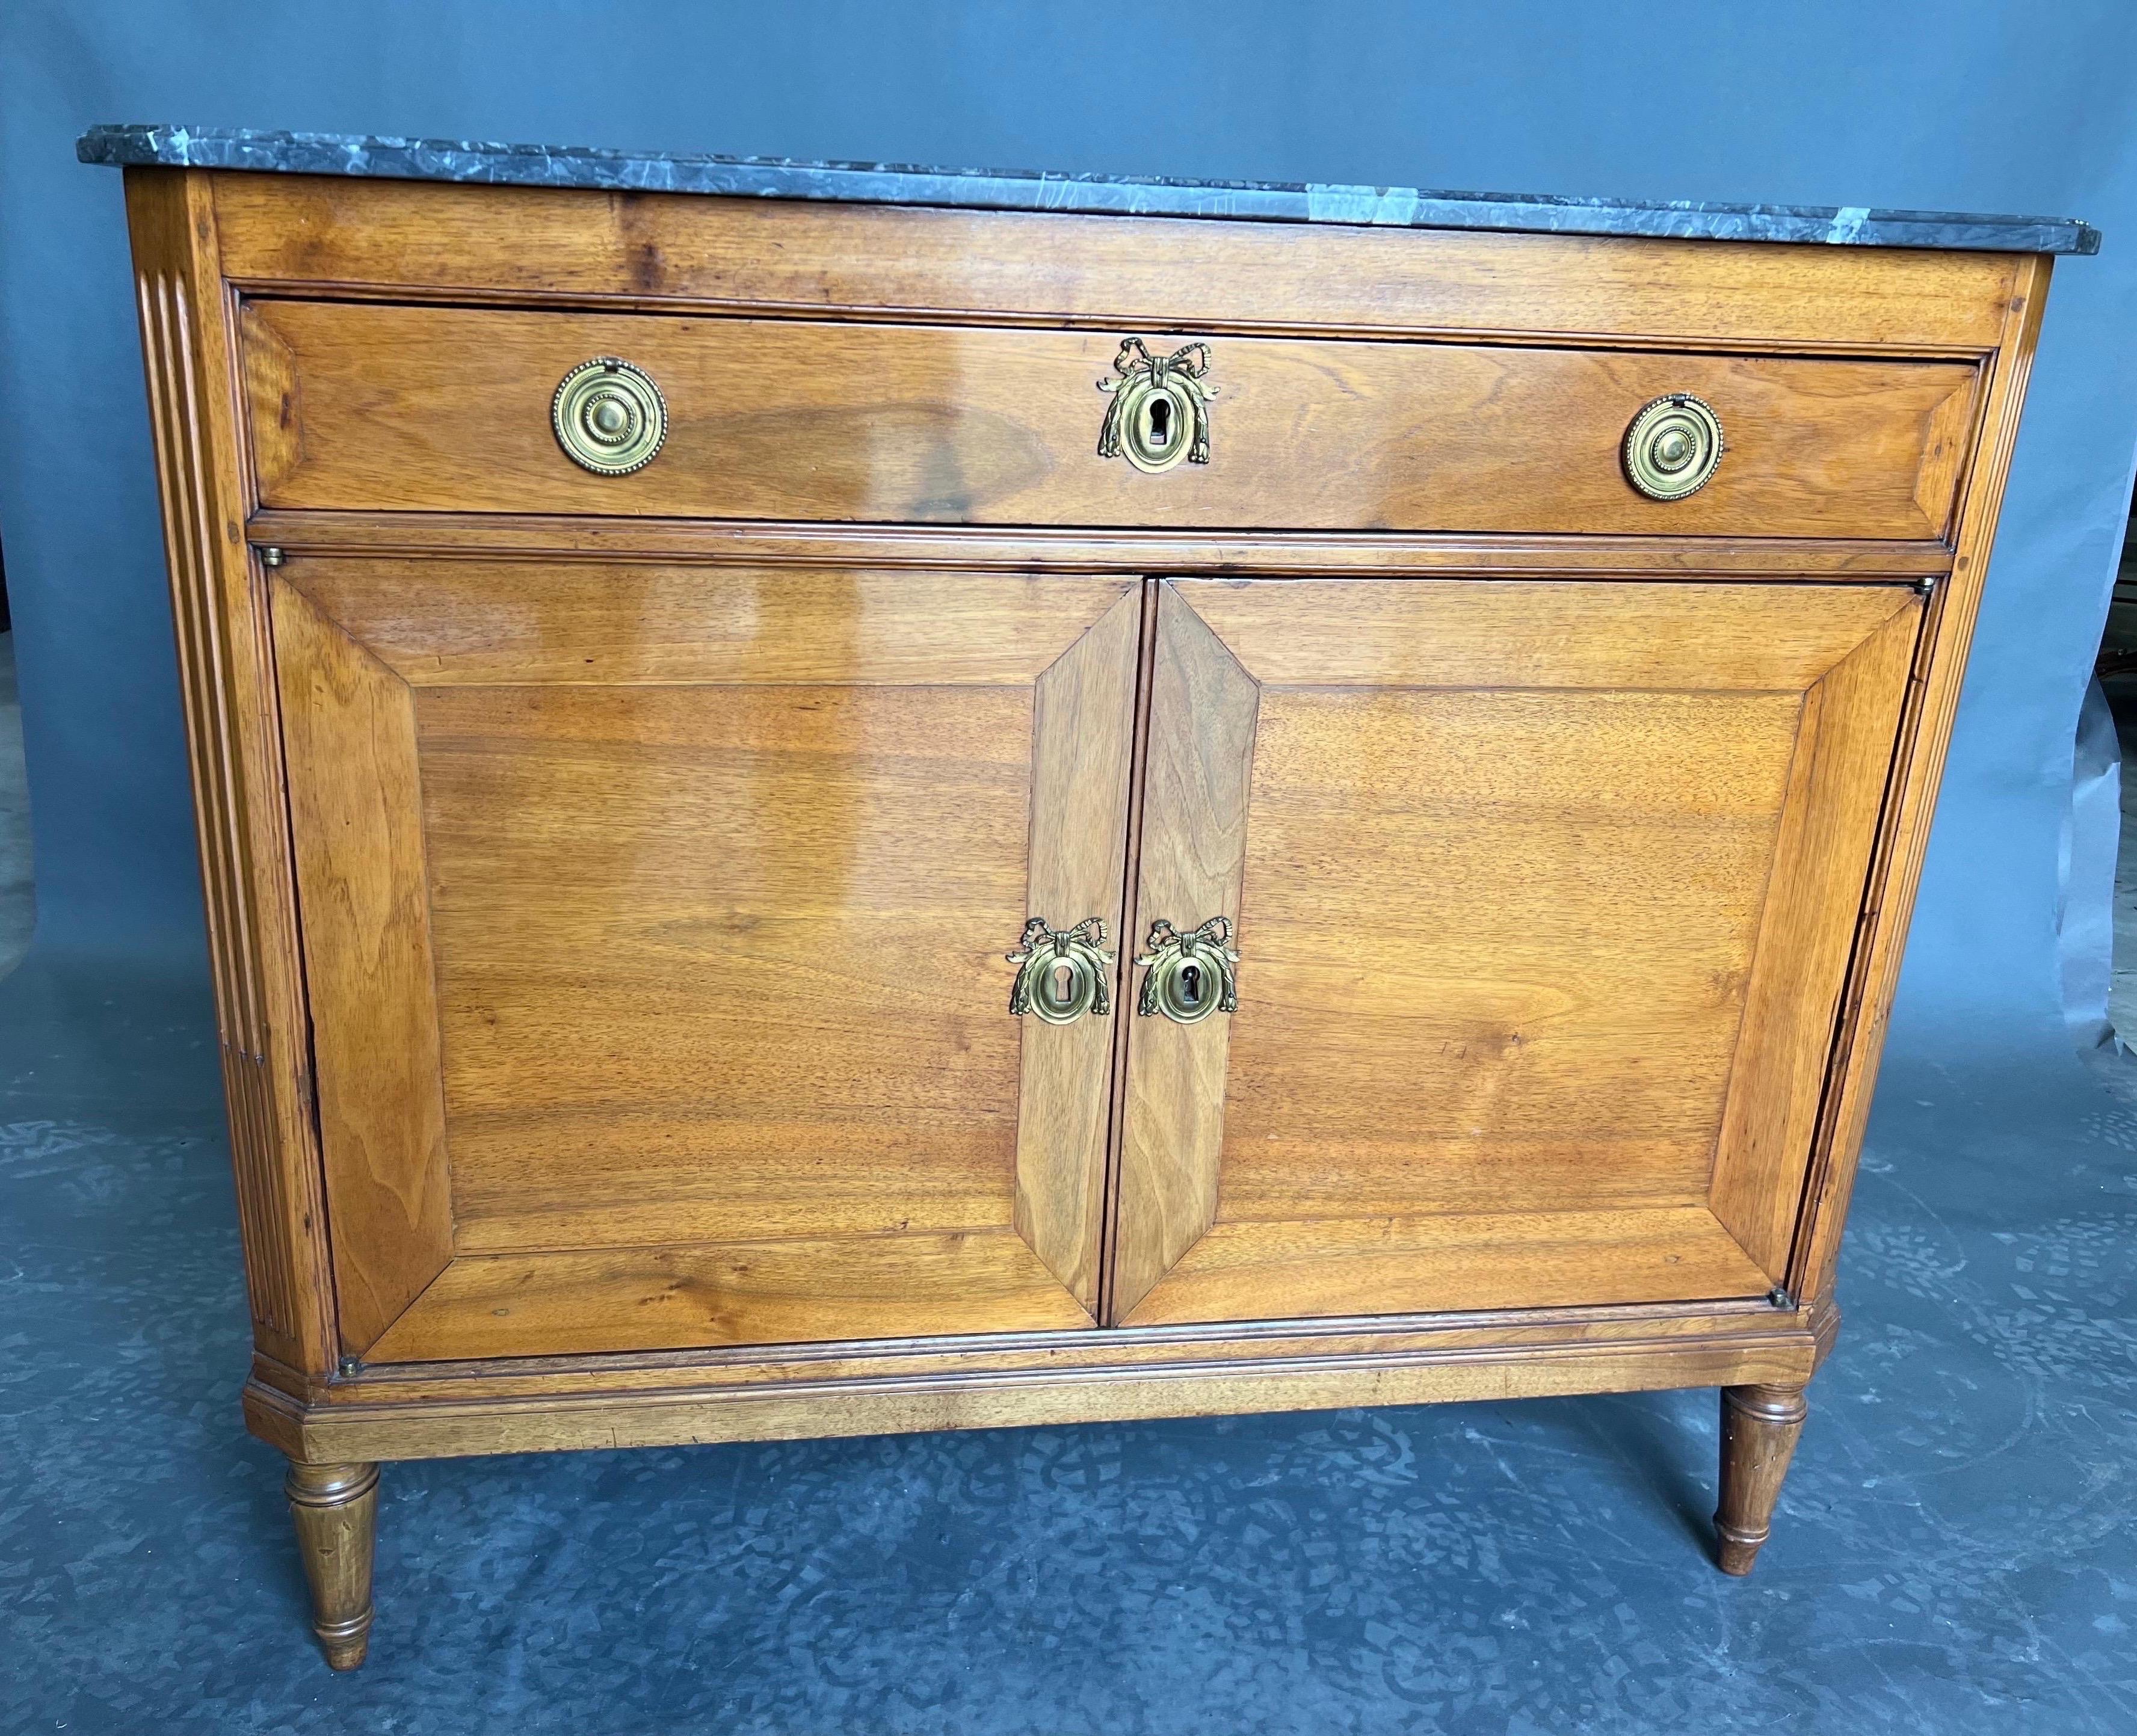 Beautiful early 19th century French or Baltic neoclassical walnut and marble top 2 door cabinet with canted corners and turned legs. This cabinet came from an incredible apartment in the Carlyle in Manhattan where the interior designer gave it a